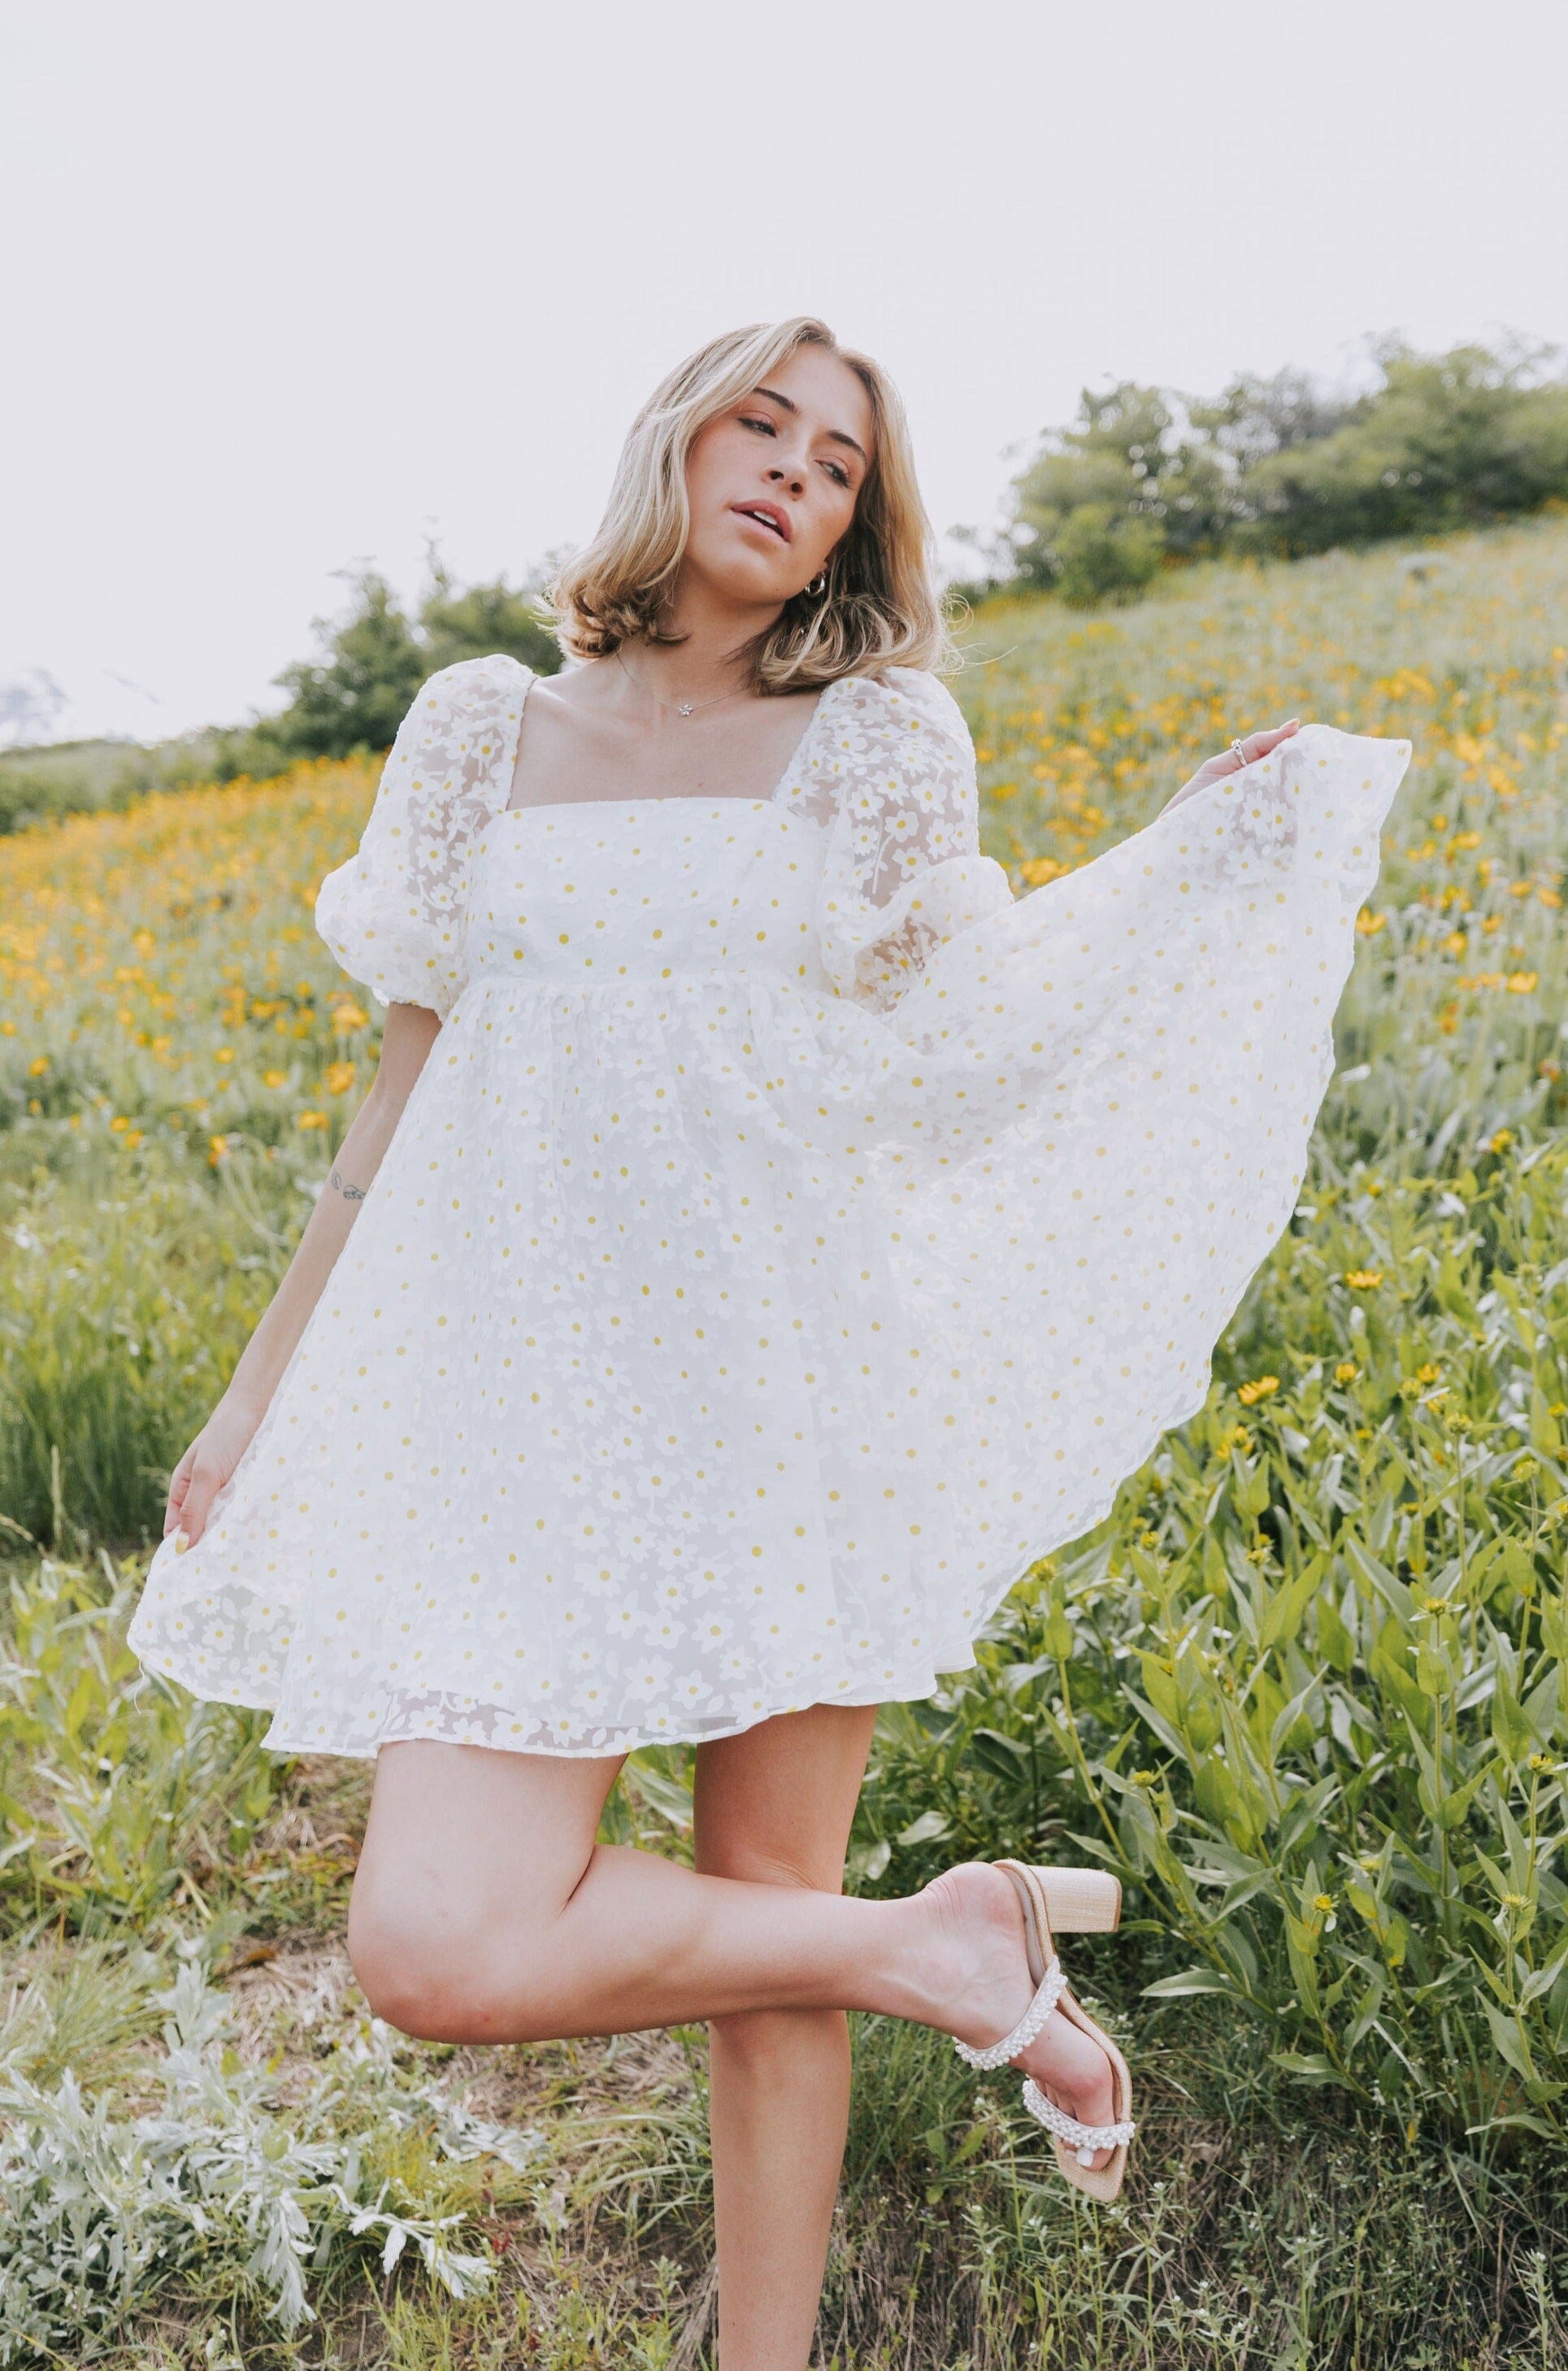 Garden Party Dresses for Summer from Tuckernuck, J. Crew, and More